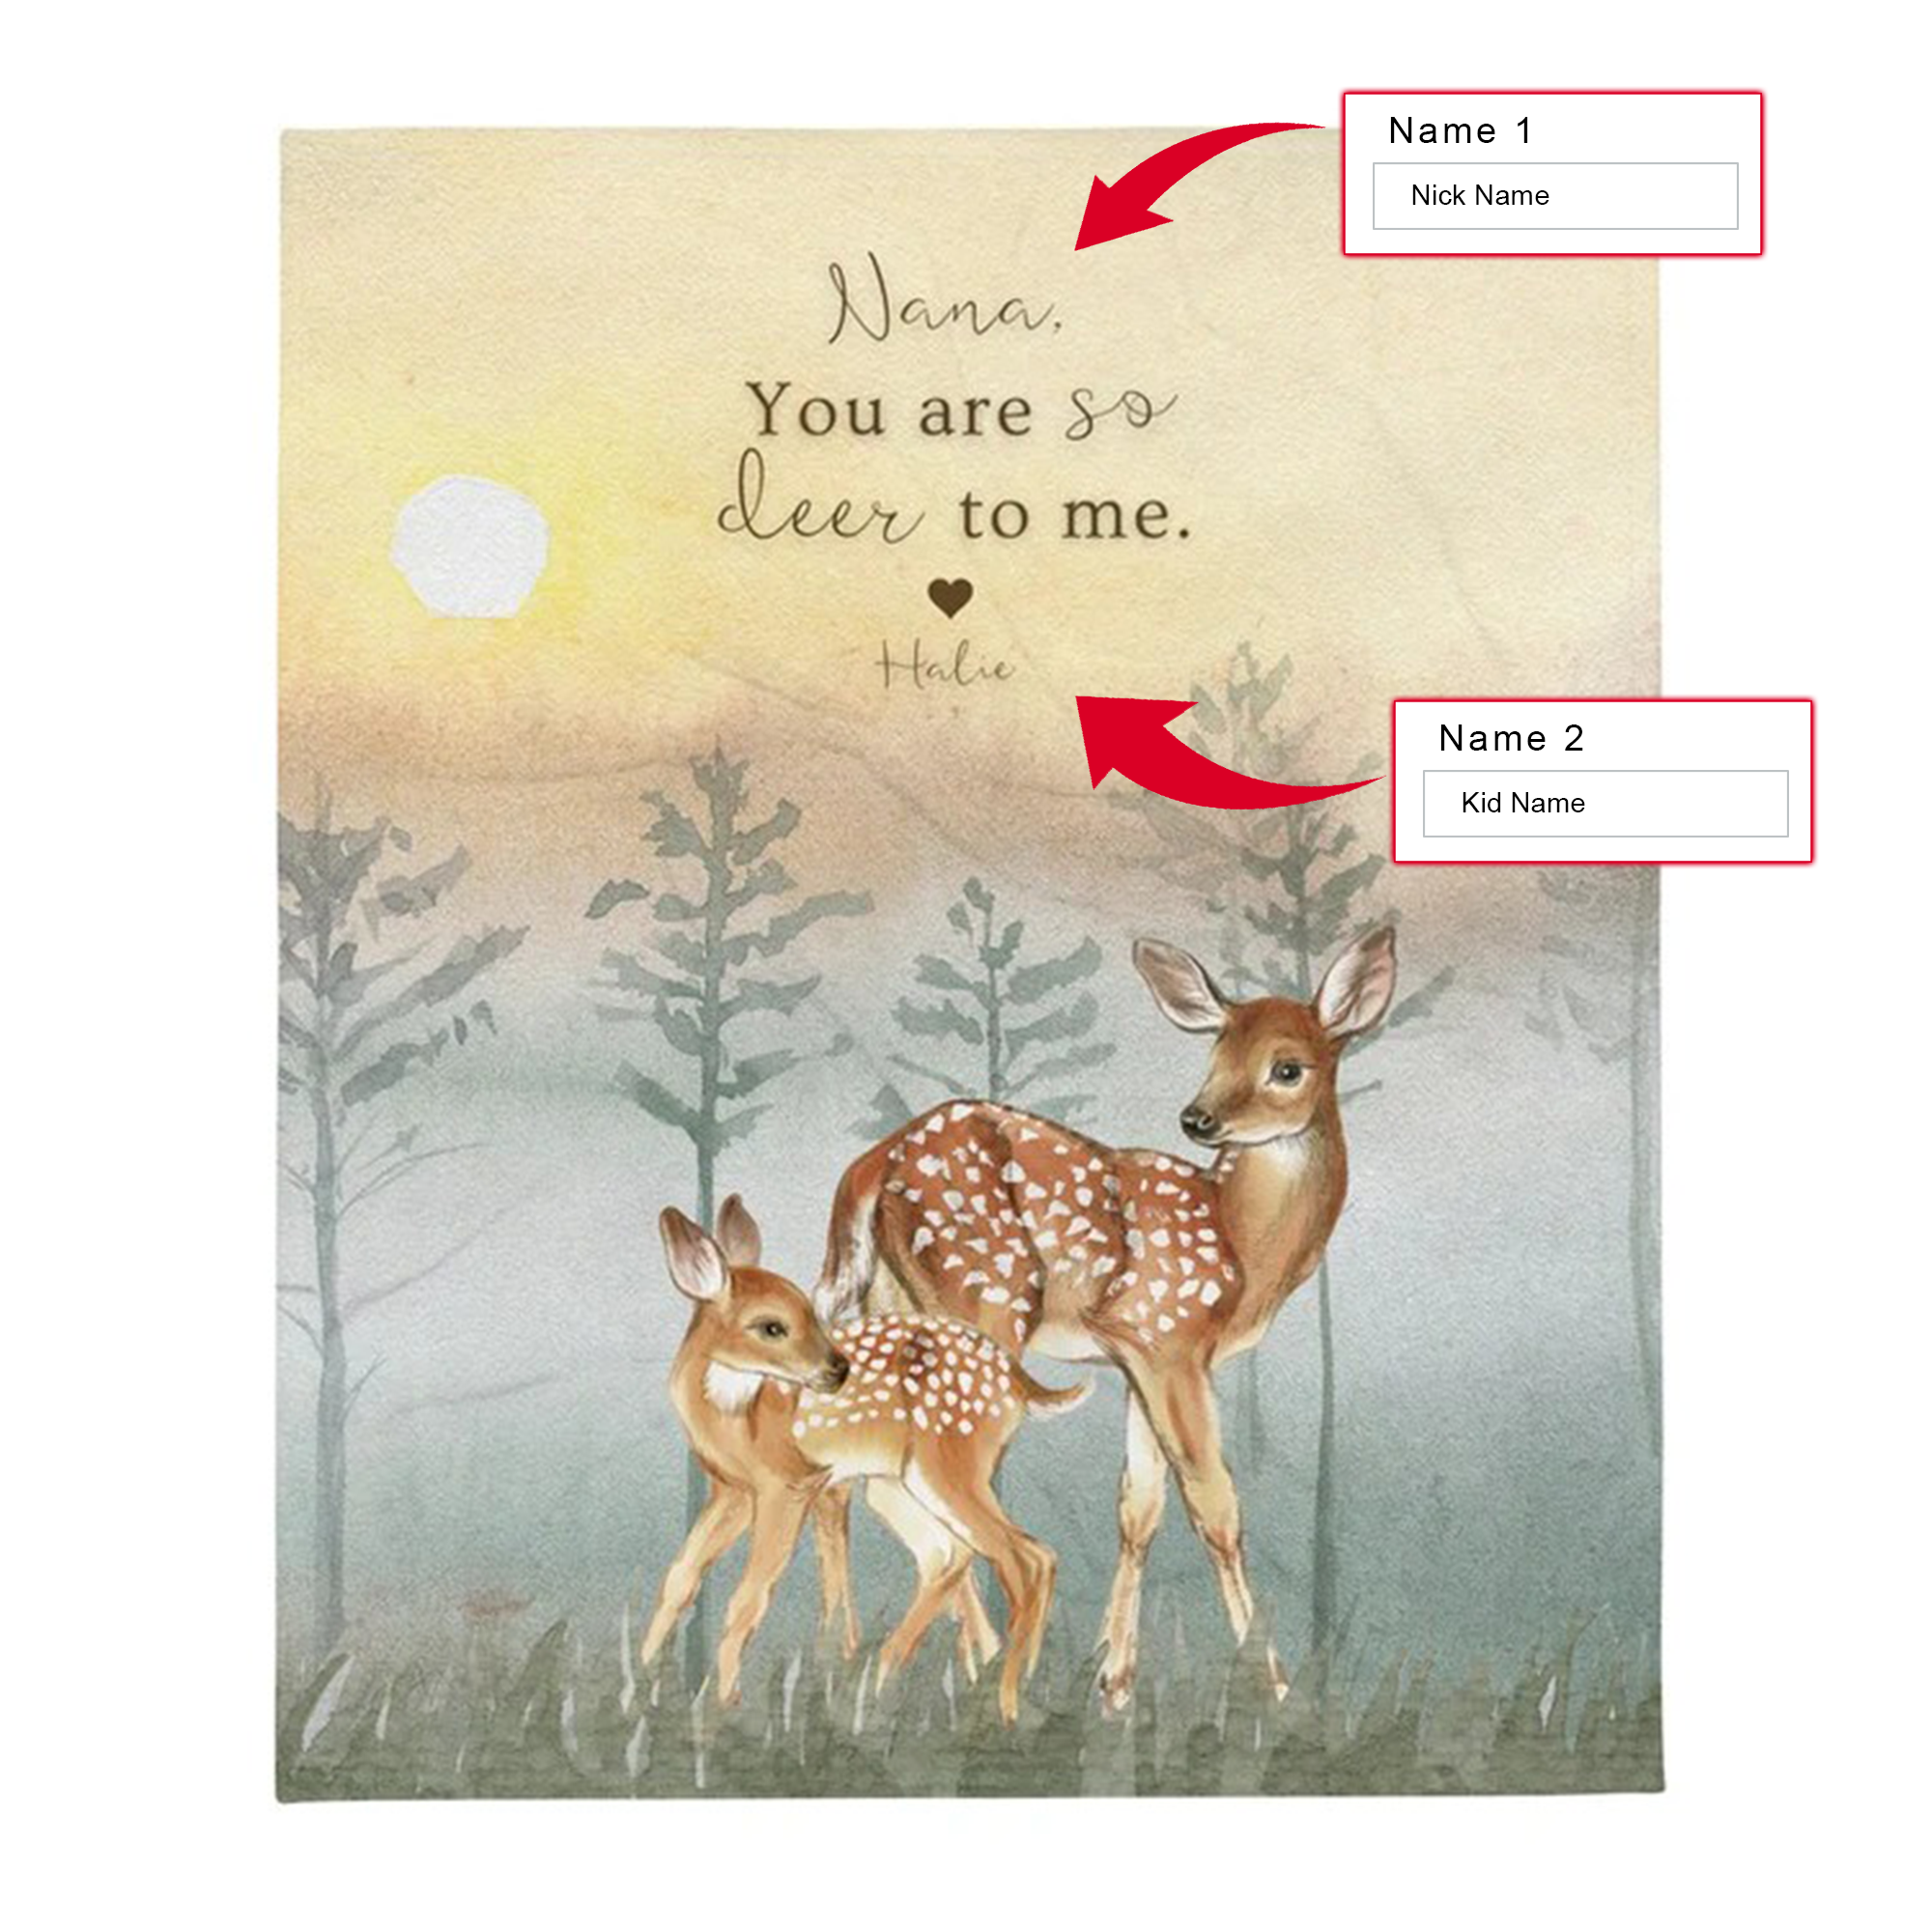 Personalized Mom Blanket, Grandma Blanket, Mother's Day Gift, Custom Name Nick Name Blanket, Mother's Gift Blanket, You Are So Deer To Me